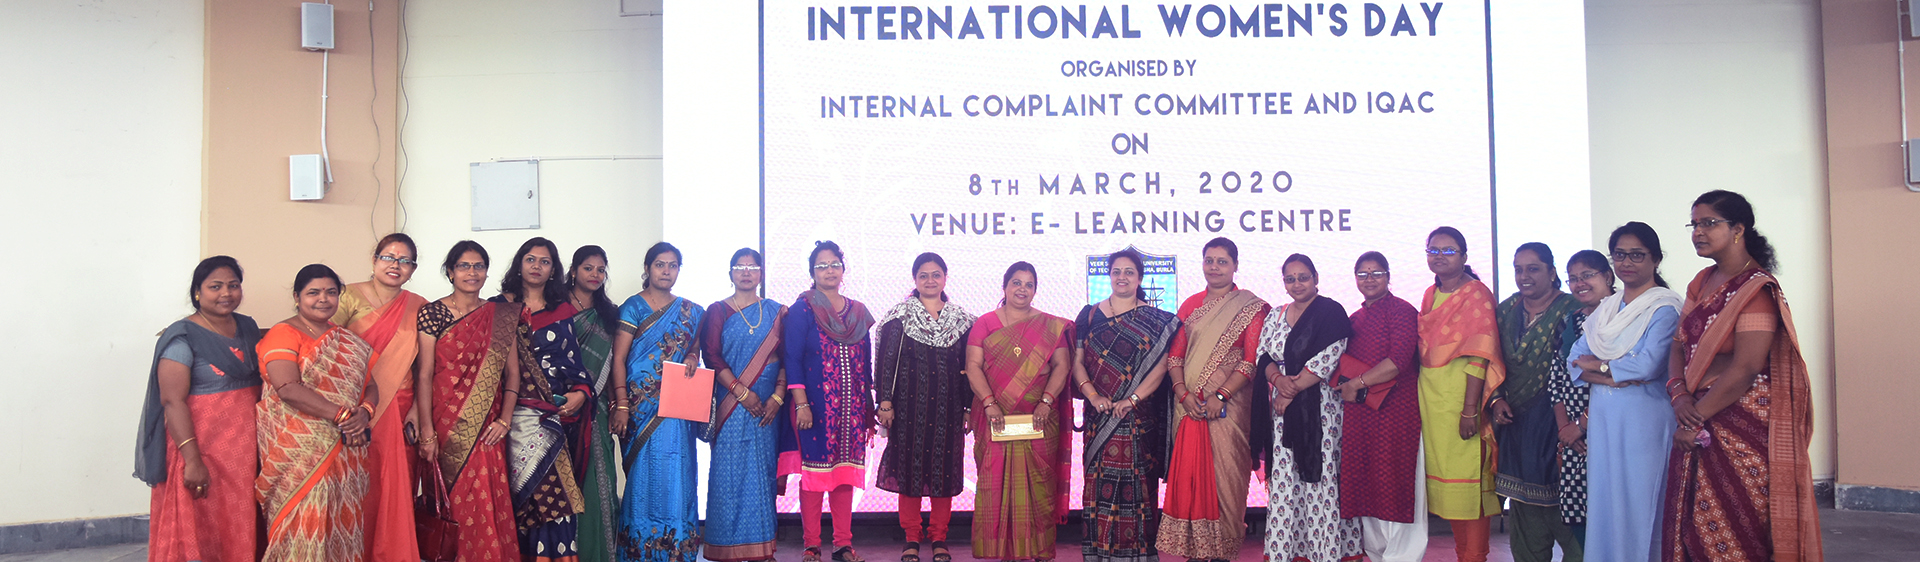 International Women's day has been celebrated at VSSUT,Burla on 8th March 2020 in presence of Vice-Chancellor in-charge Prof.P.K.Hota.,Dr. Sunanda Nayak,VIMSAR,chief guest.Mr.Amaresh Panda,additional Superintendent of Police.